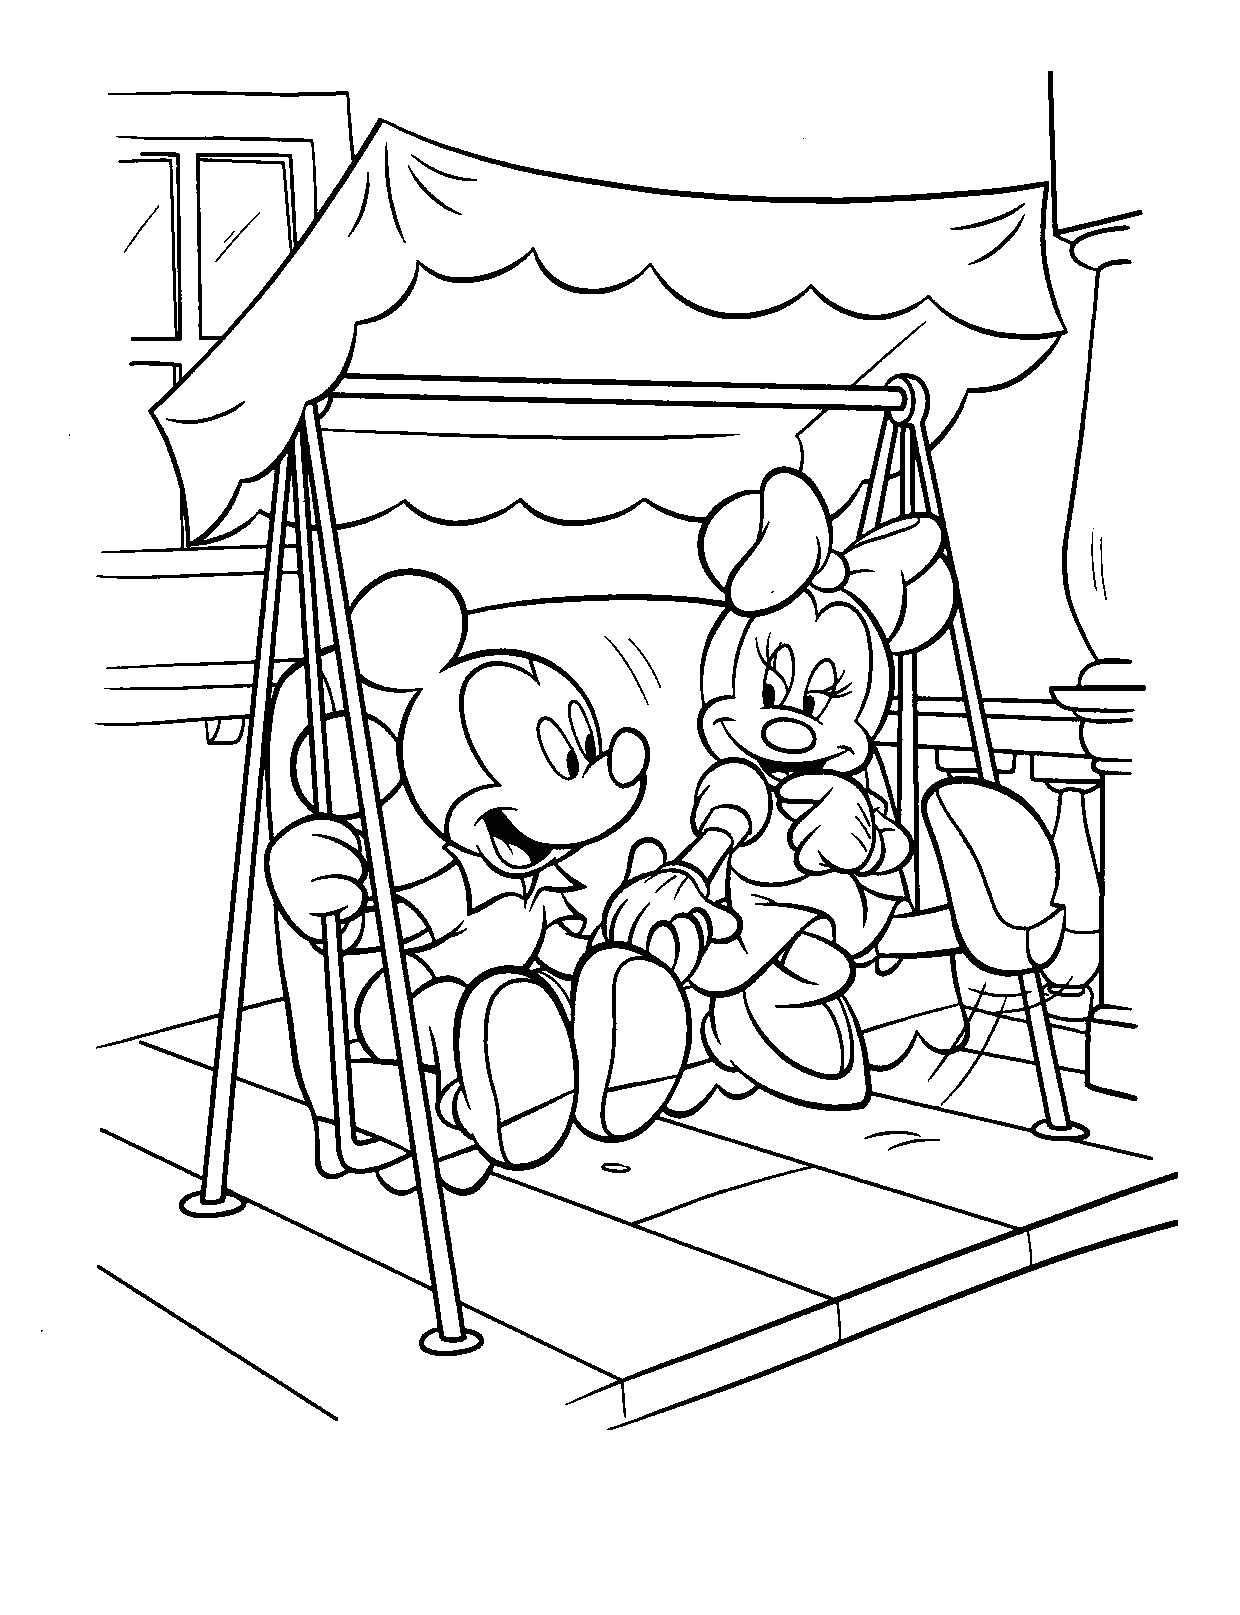 Minnie And Mickey Coloring Pages
 Free Printable Minnie Mouse Coloring Pages For Kids